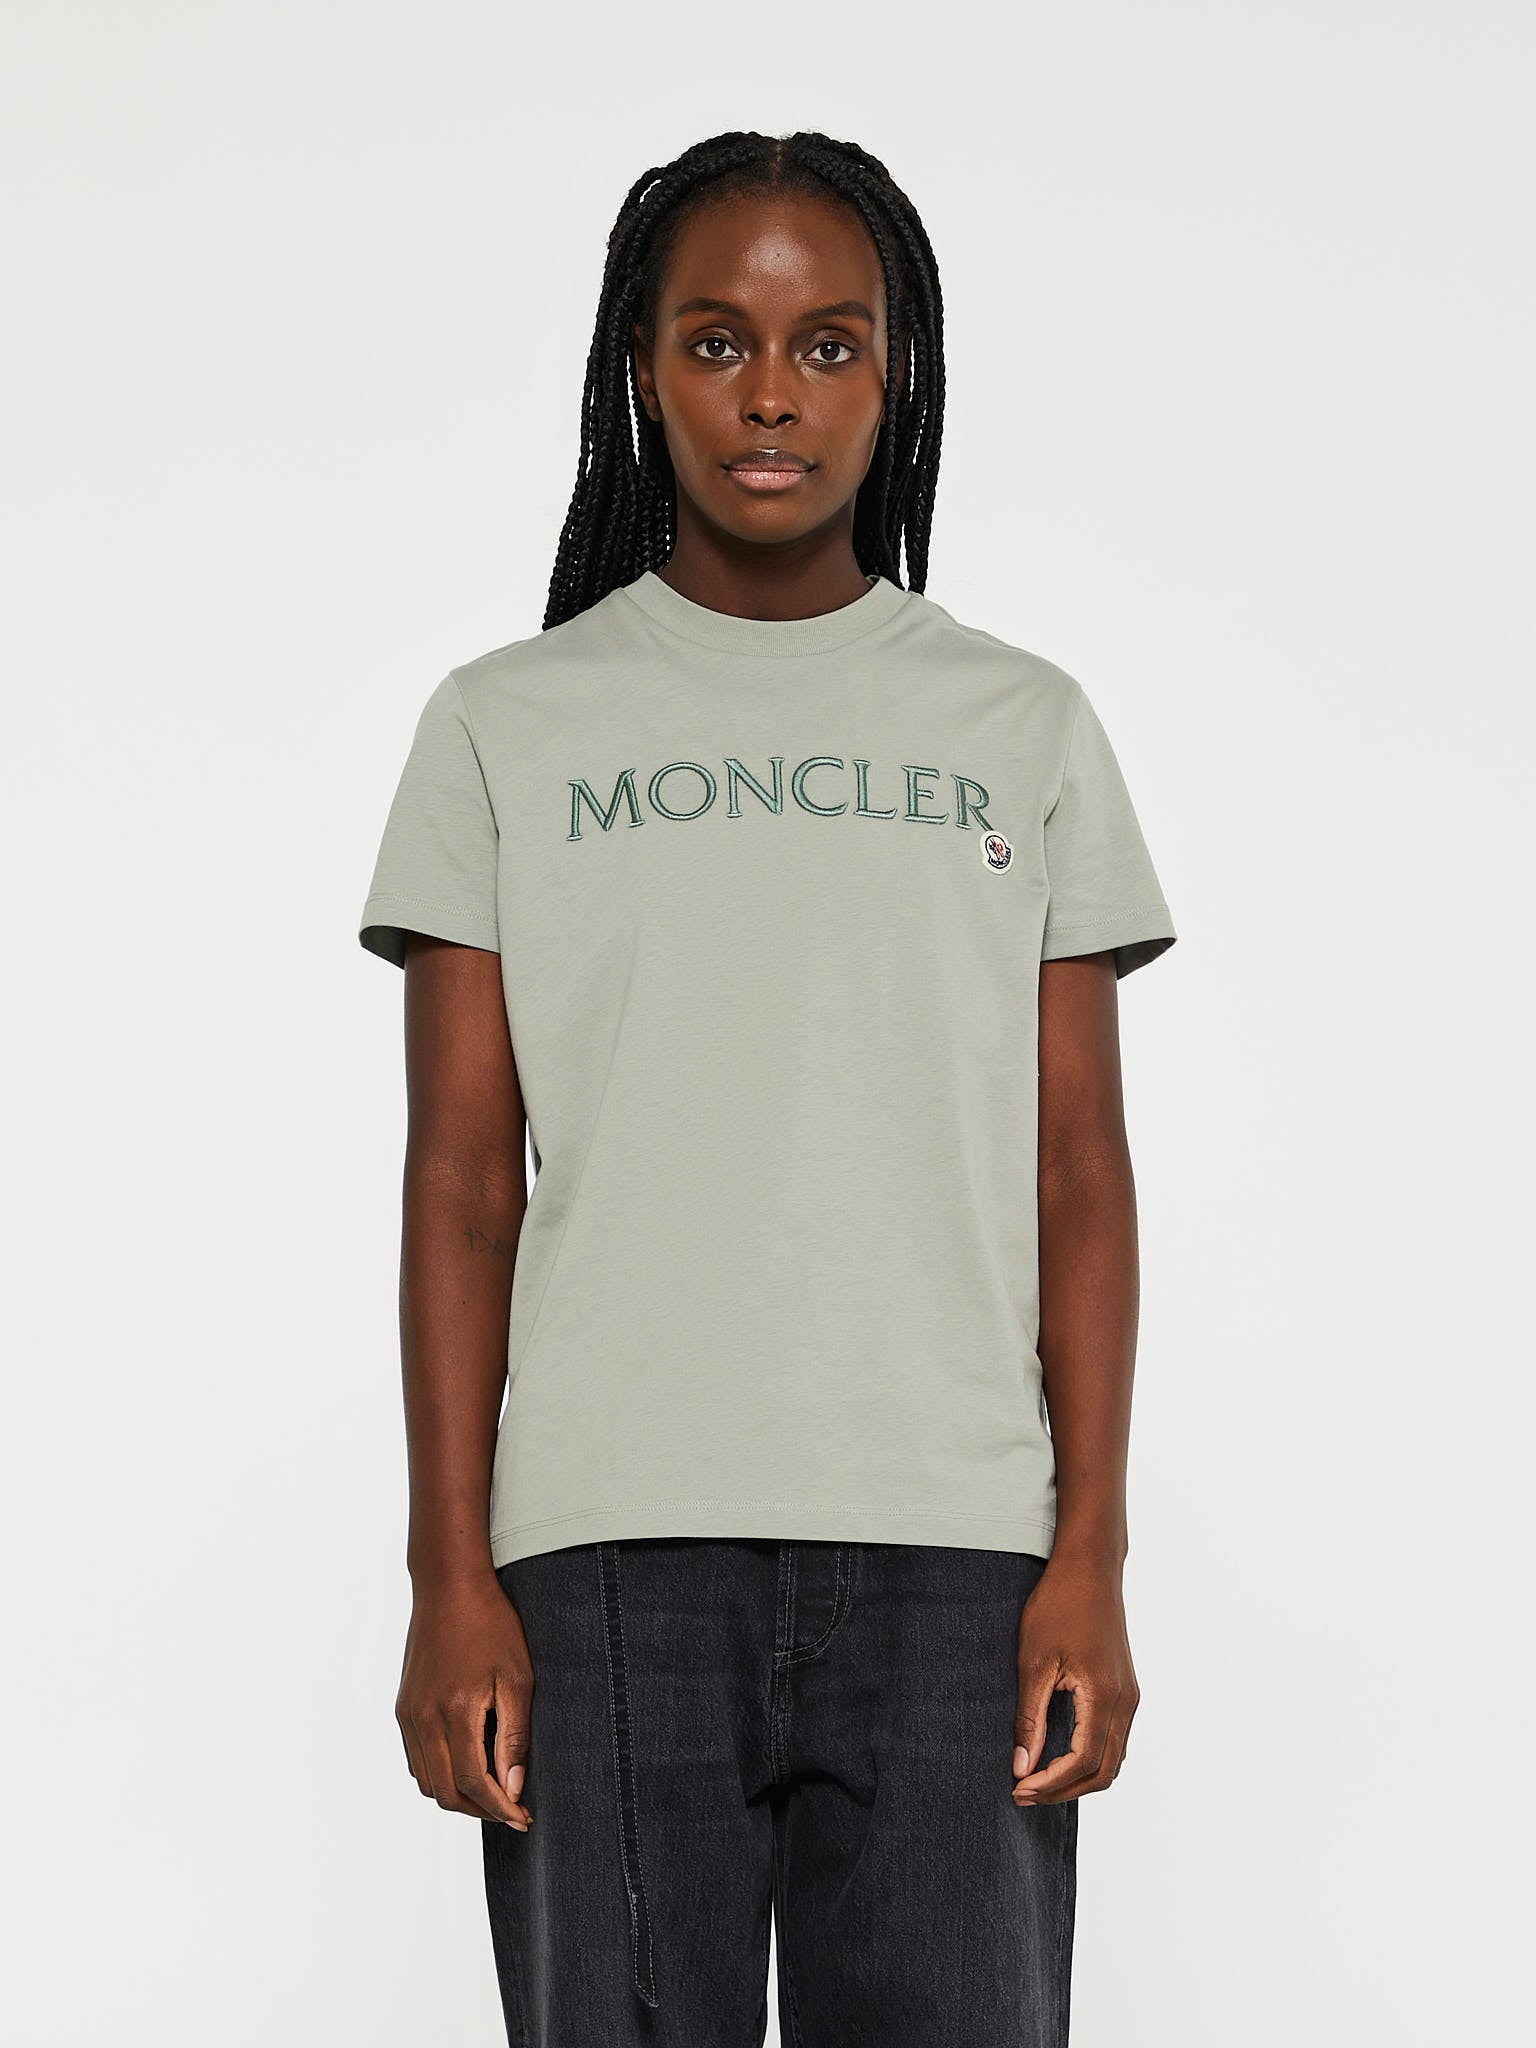 Moncler - T-Shirt in Crusted Gravel